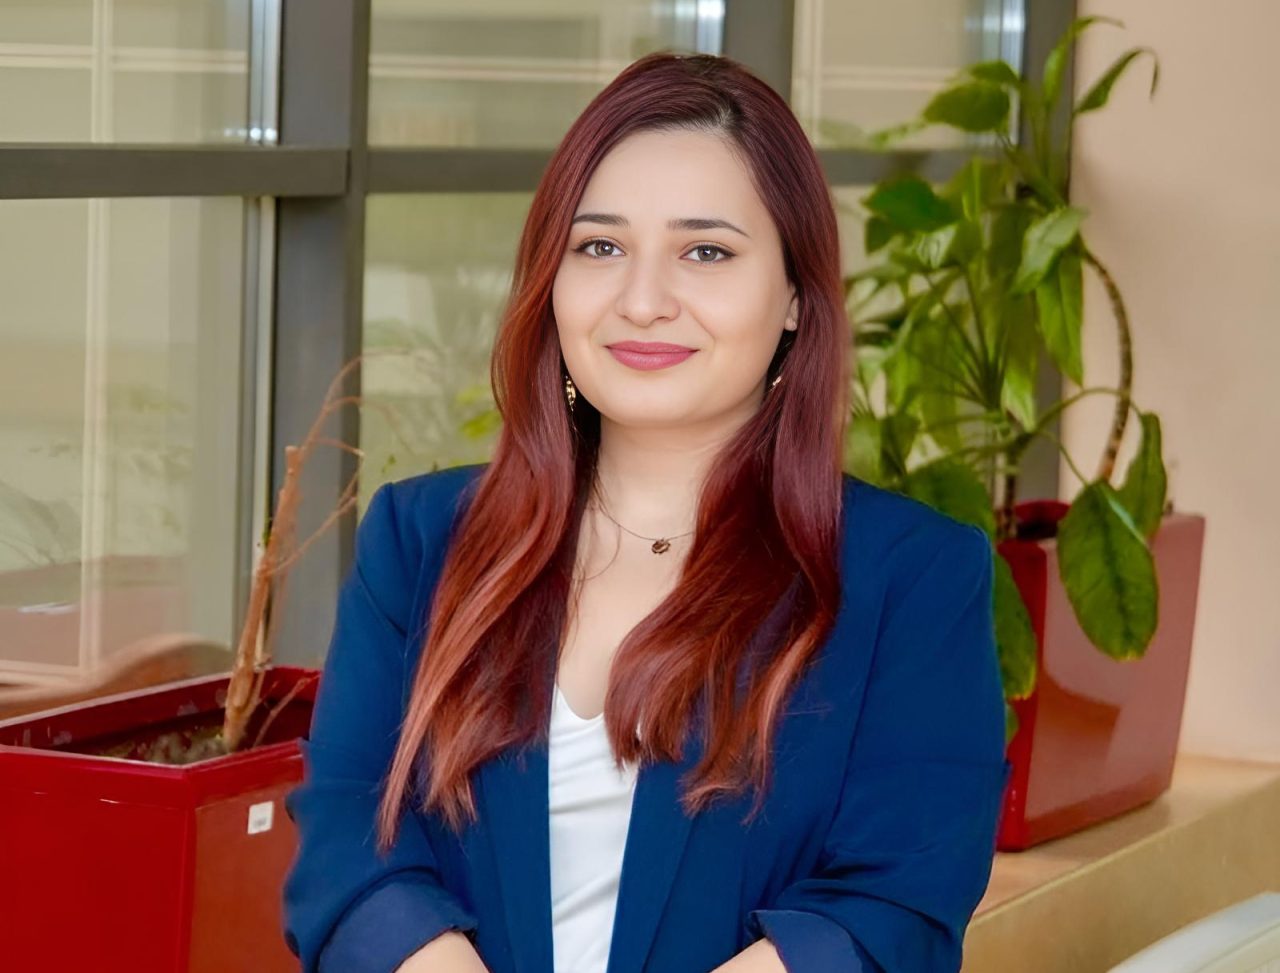 Ruzanna Papyan: Honored to be chosen as the Young SIOP Asia representative